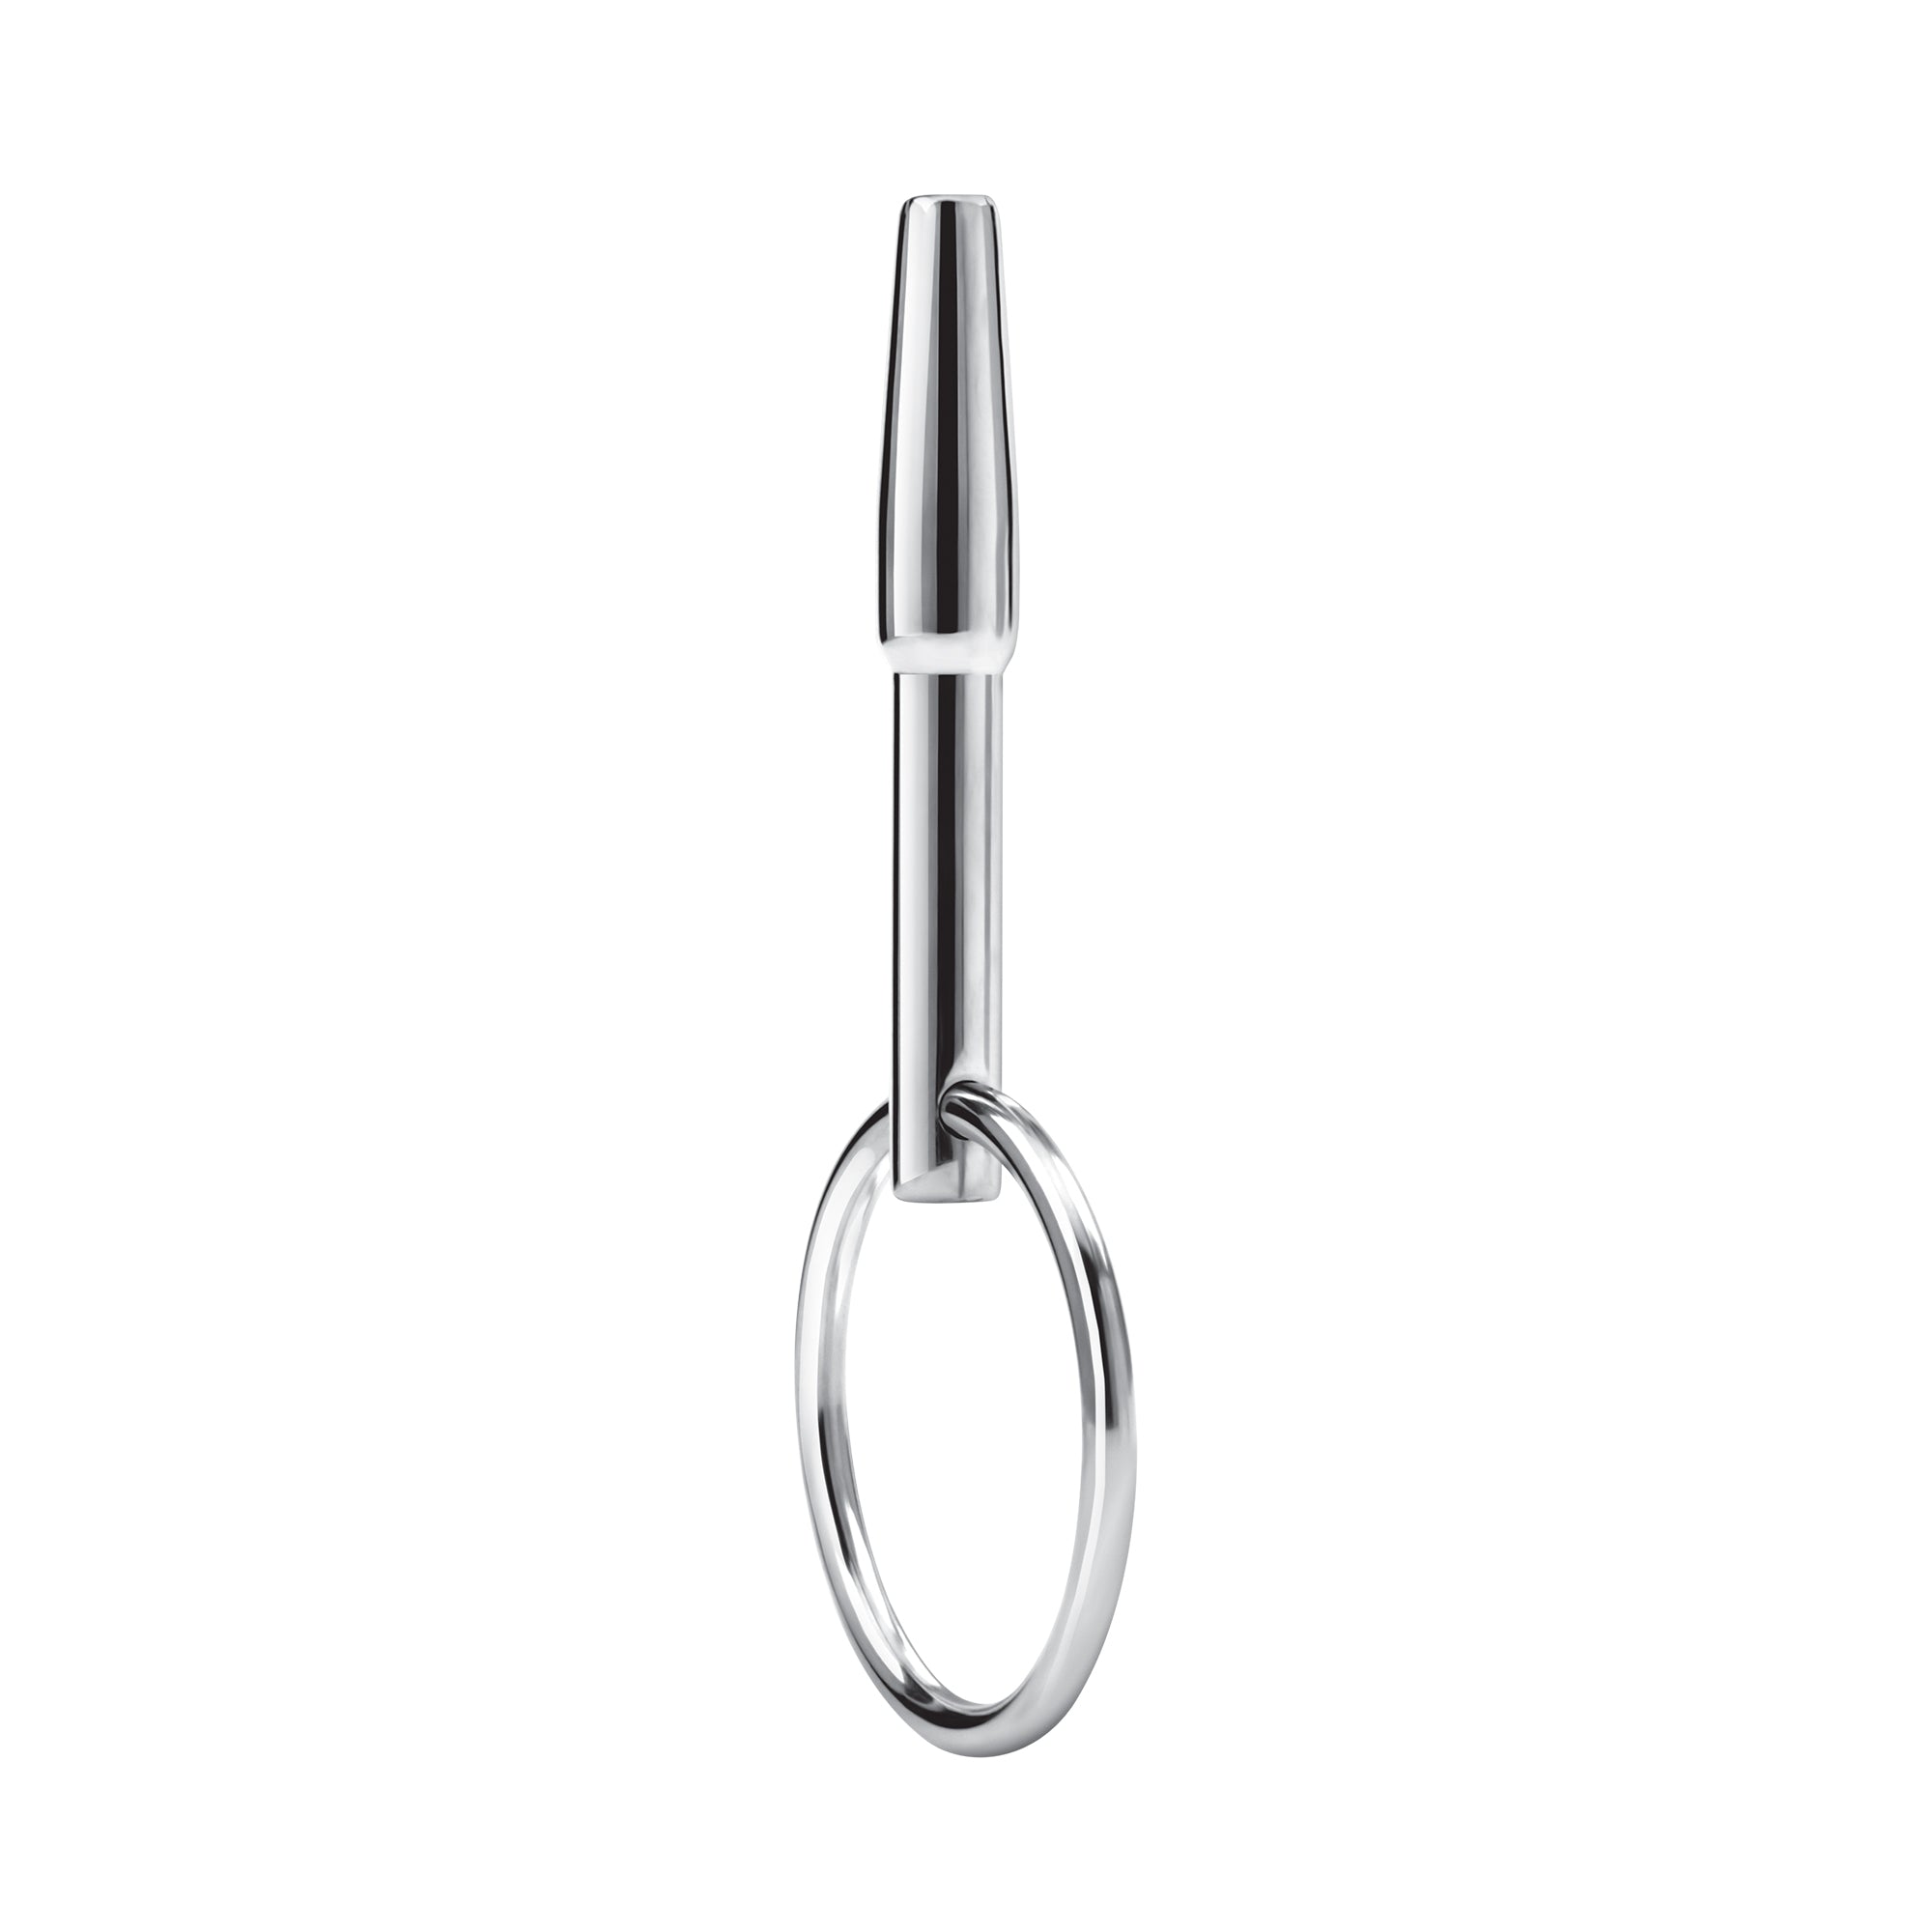 Stainless Steel Penis Plug with Ring